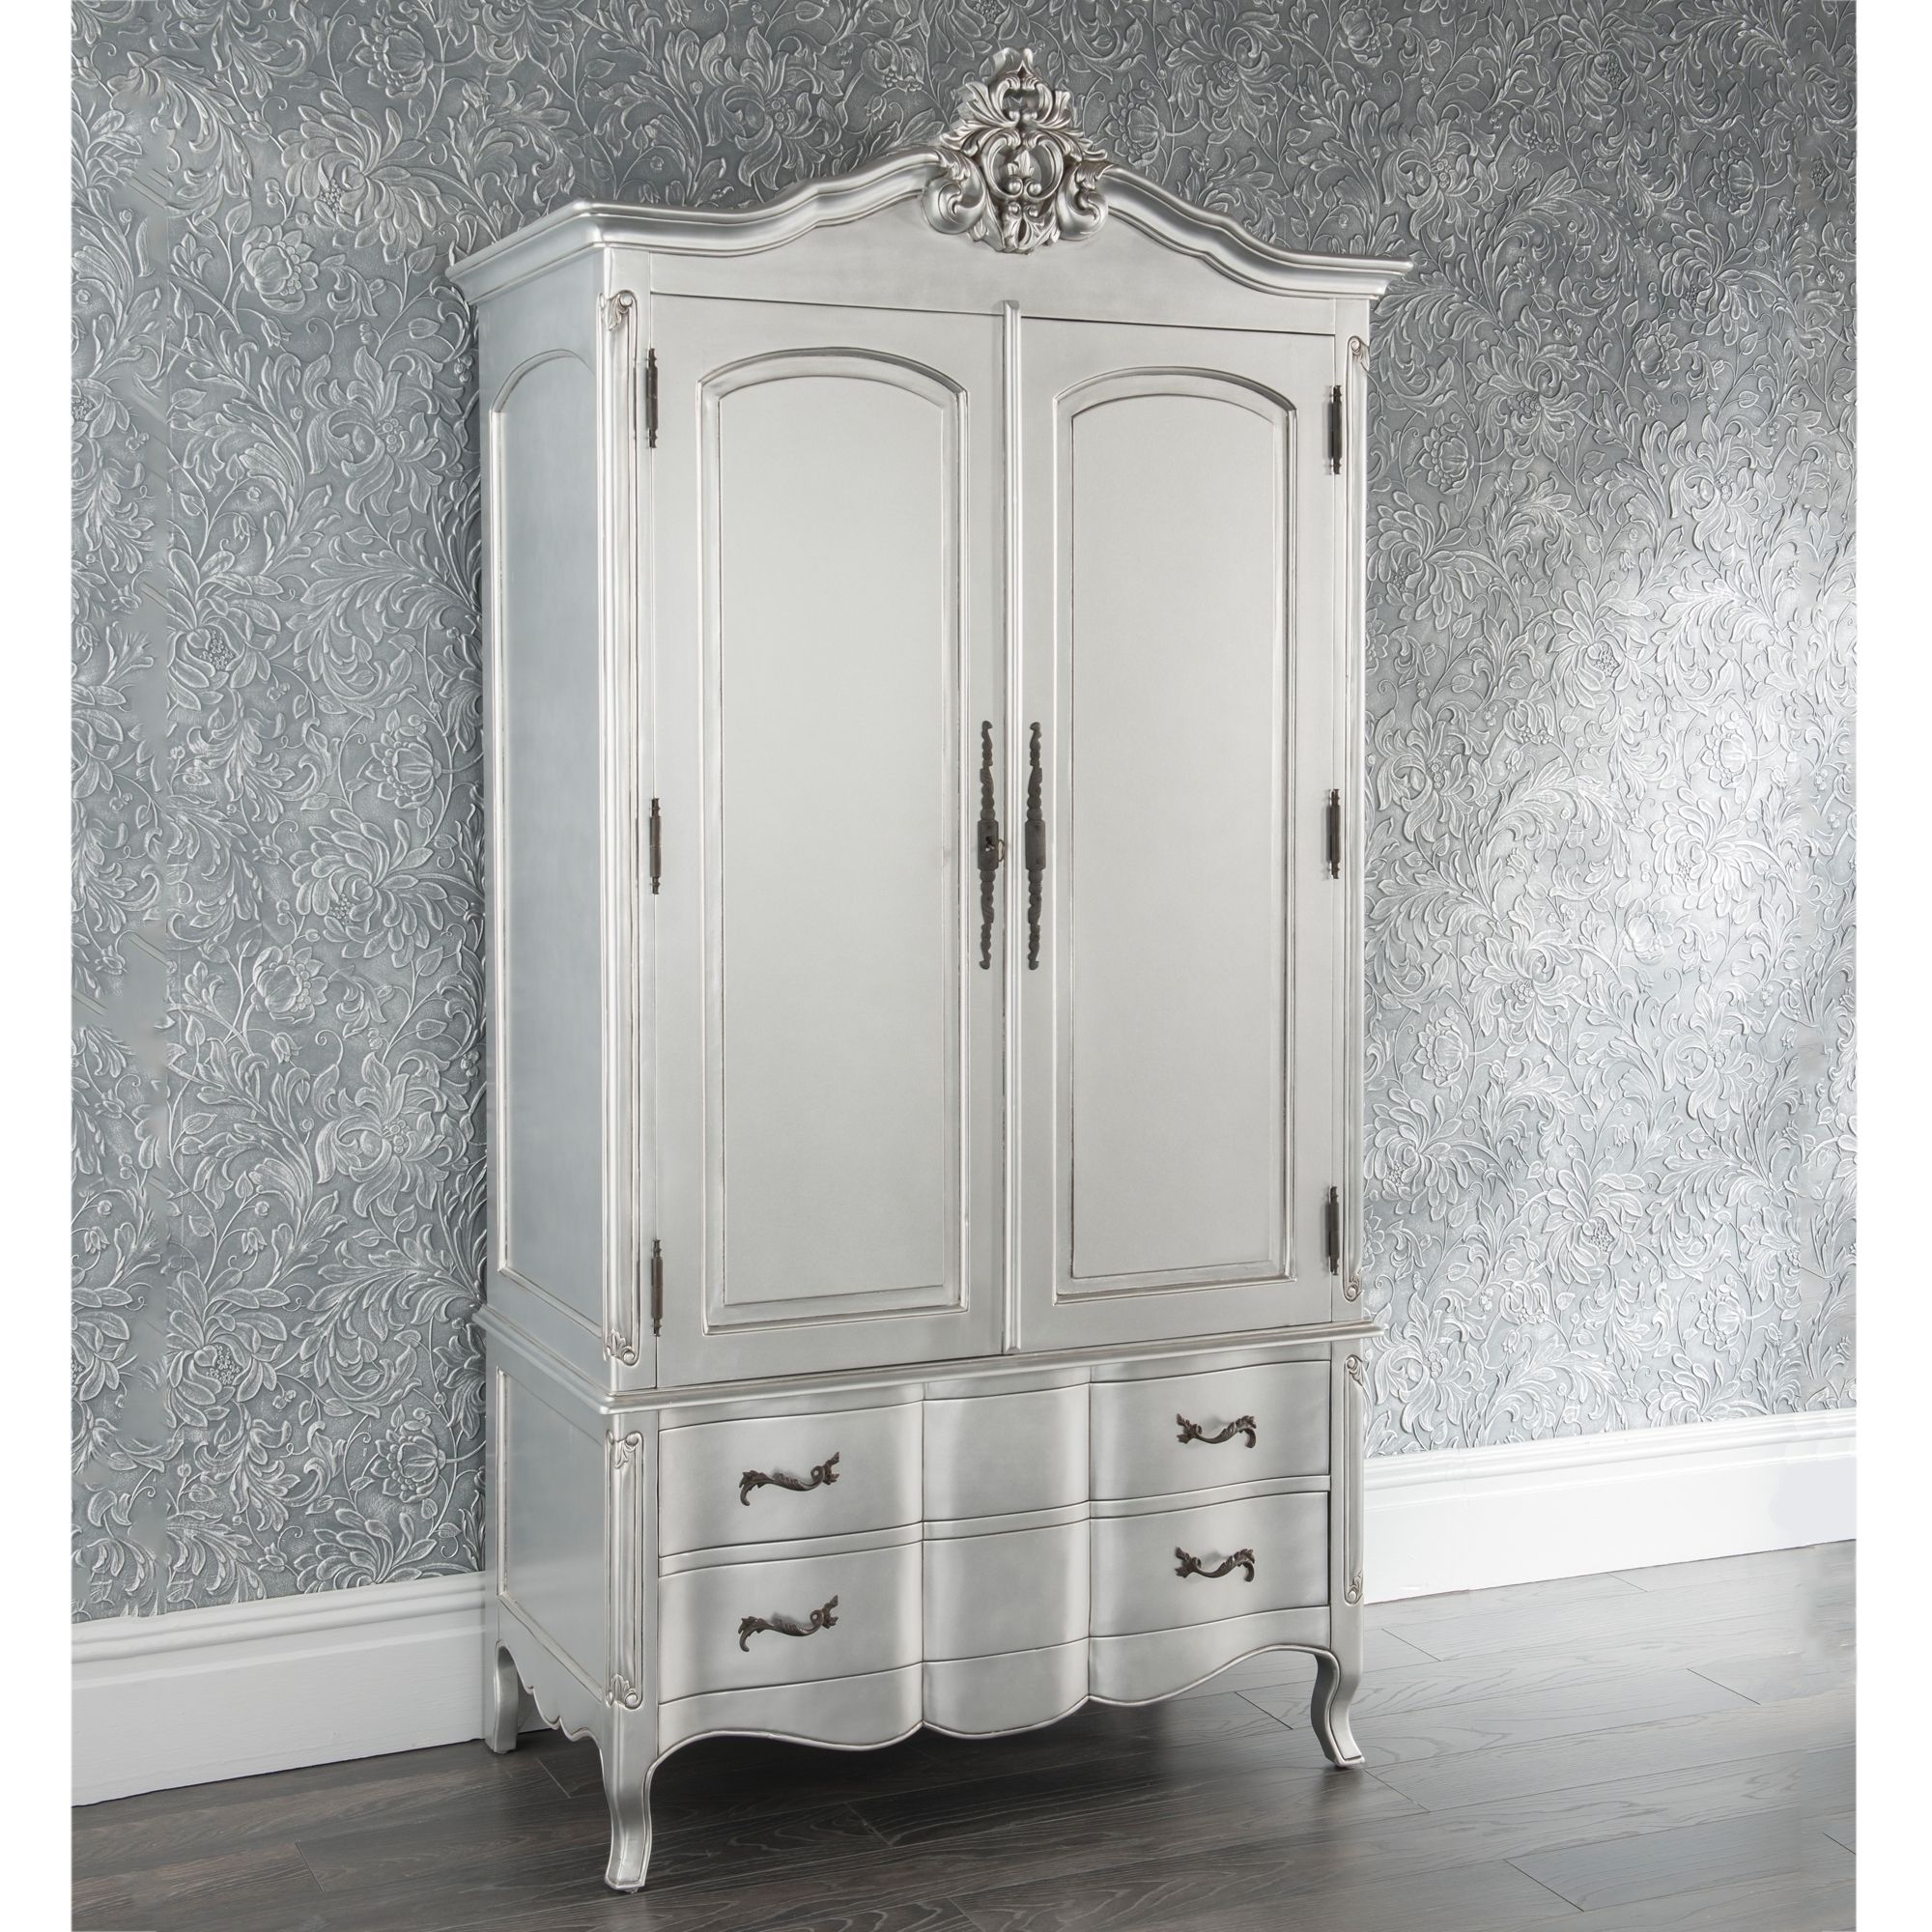 Estelle Antique French Style Wardrobe | French Style Furniture Throughout Silver French Wardrobes (View 3 of 20)